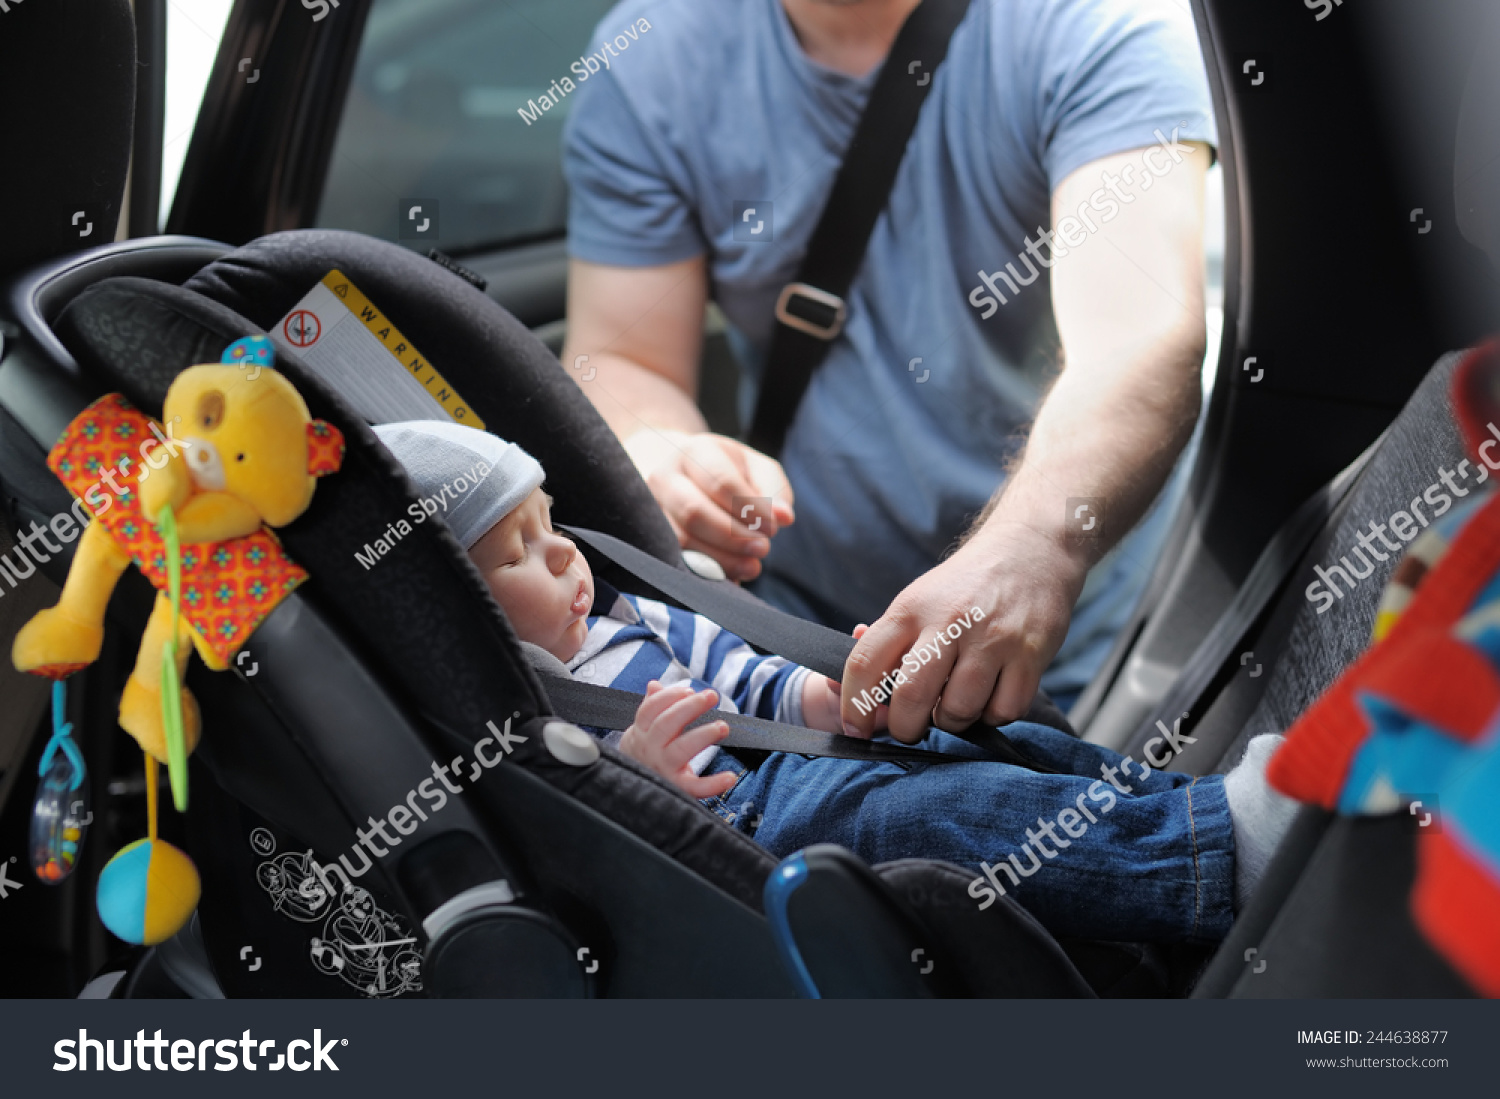 Father fasten his little son in car seat #244638877